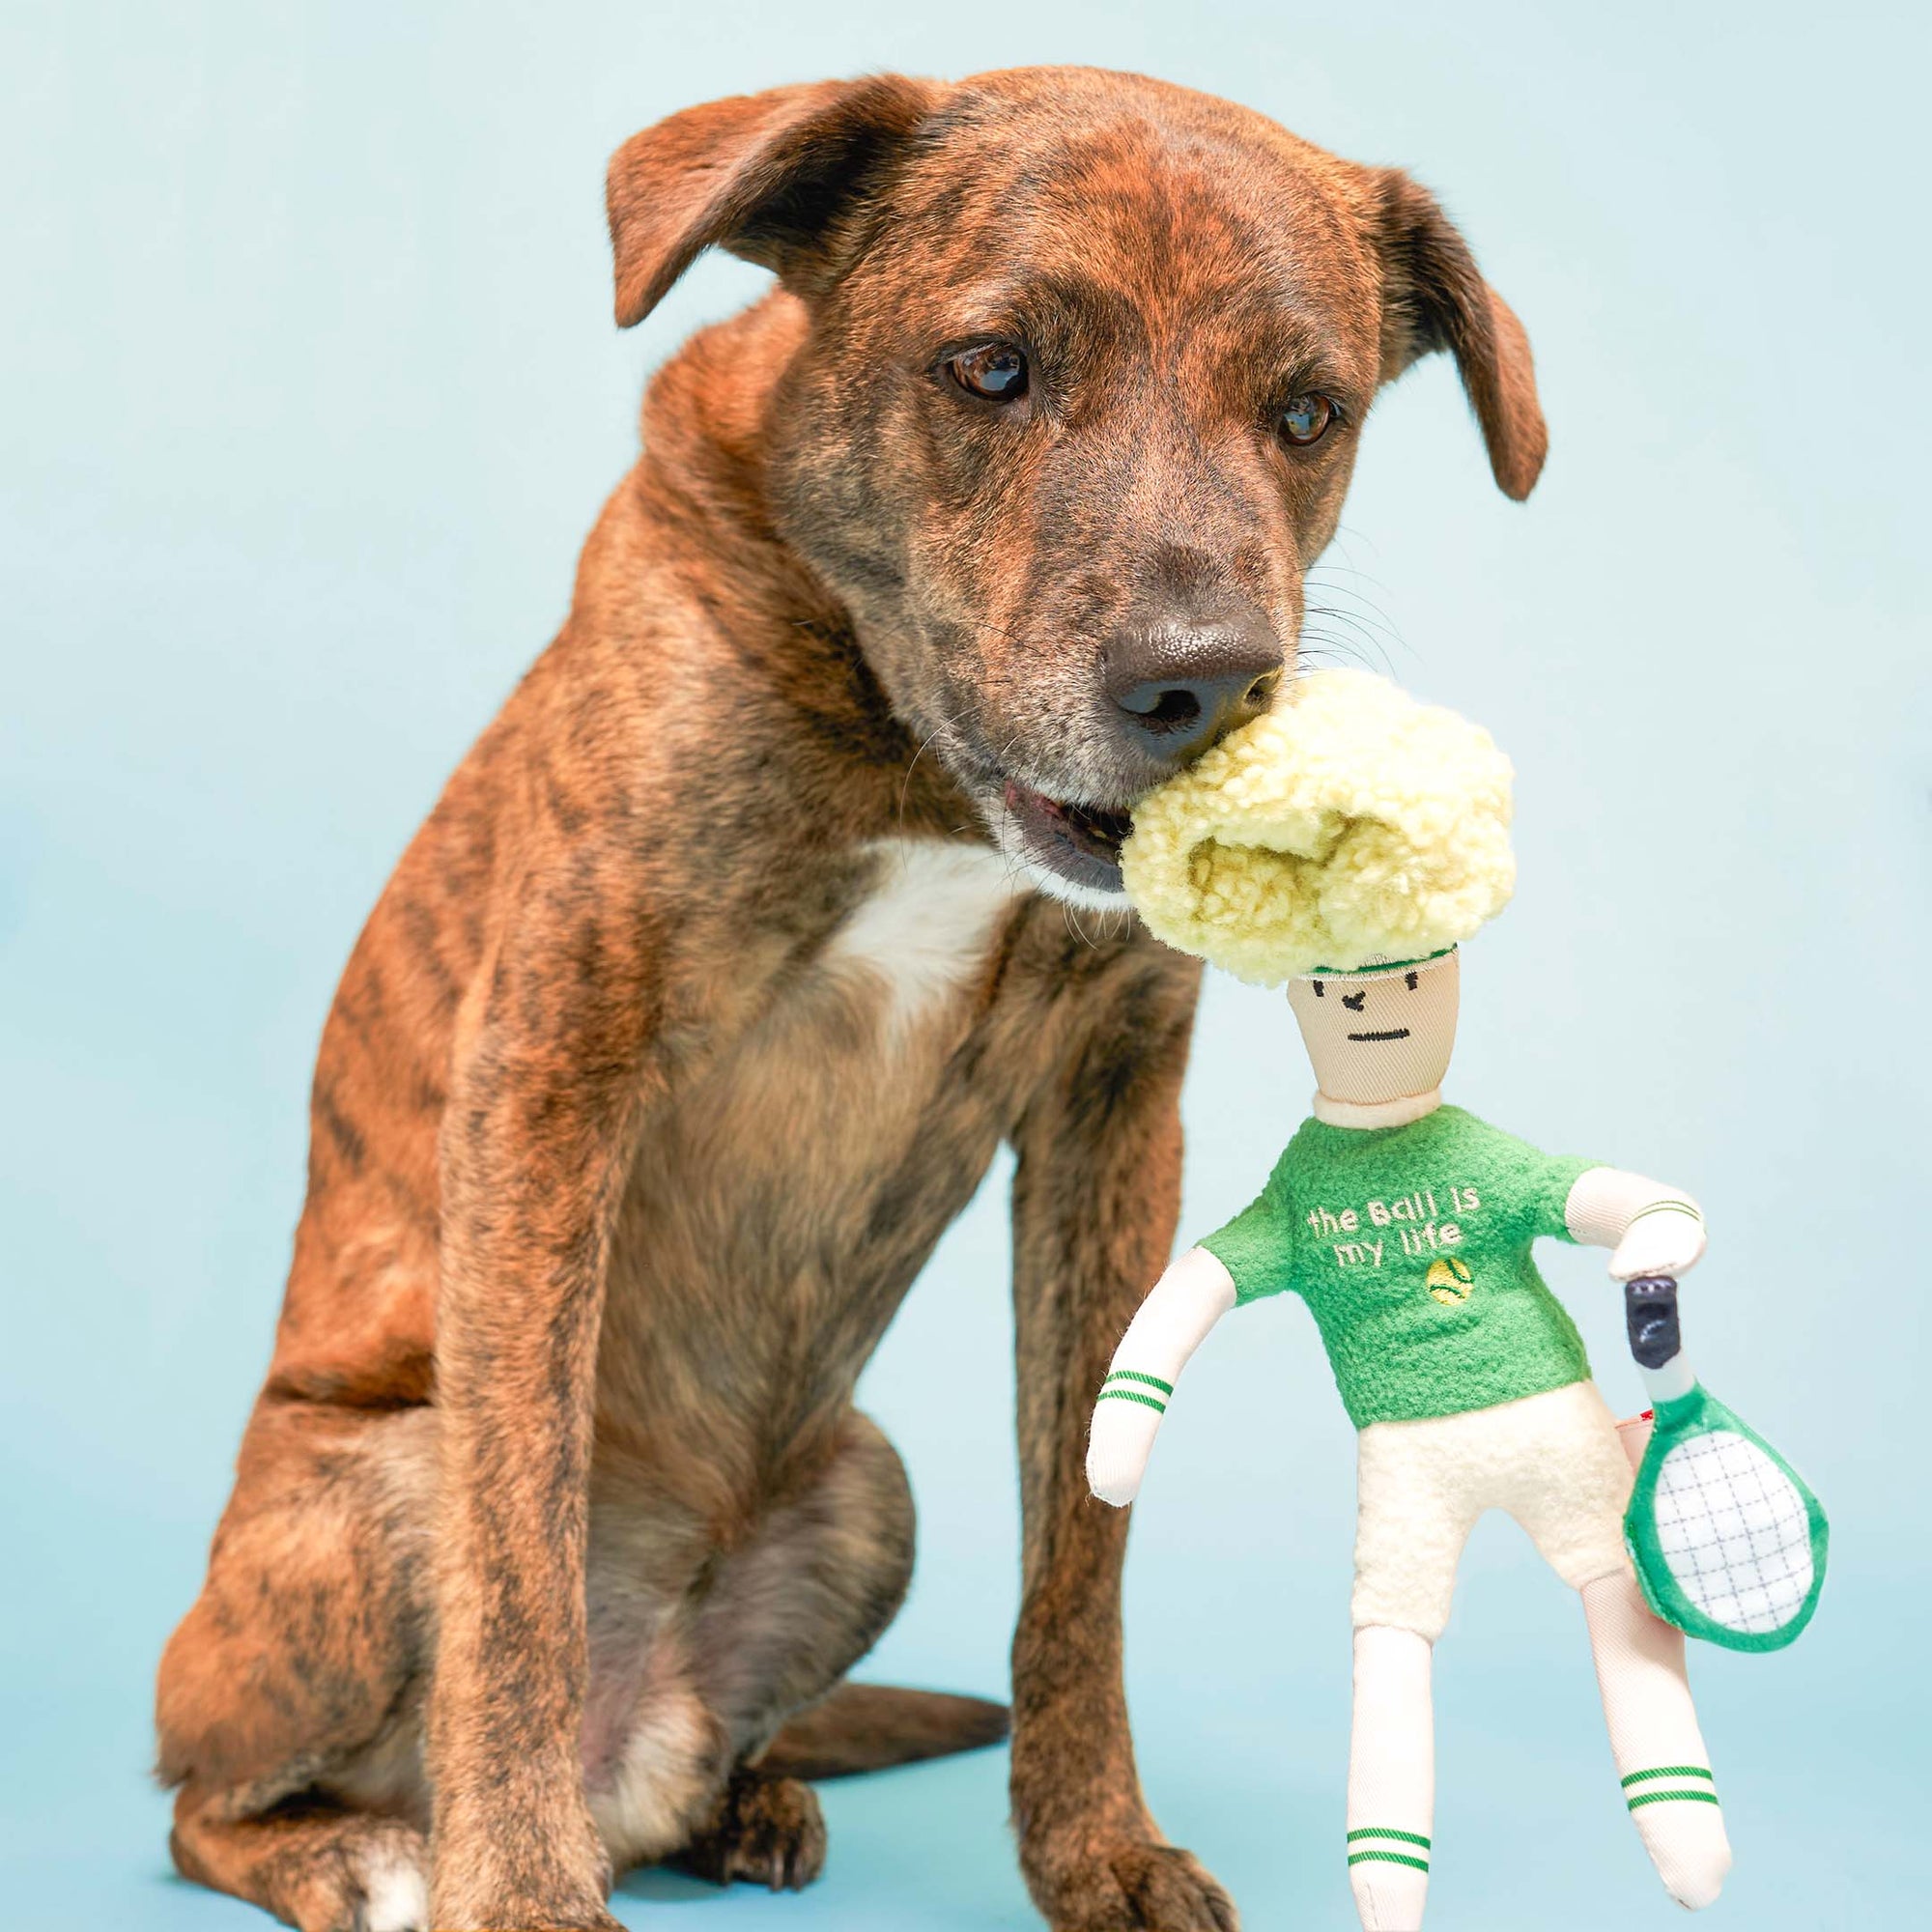 The brindle dog is sitting against a light blue background, gently holding a plush toy in its mouth. The toy is styled as a whimsical tennis player, with a green hat decorated with plush flowers, a green sweater with "the ball is my life" on it, and a white tennis racket in its hand. The dog's expression is attentive and gentle, highlighting a playful interaction with the toy.